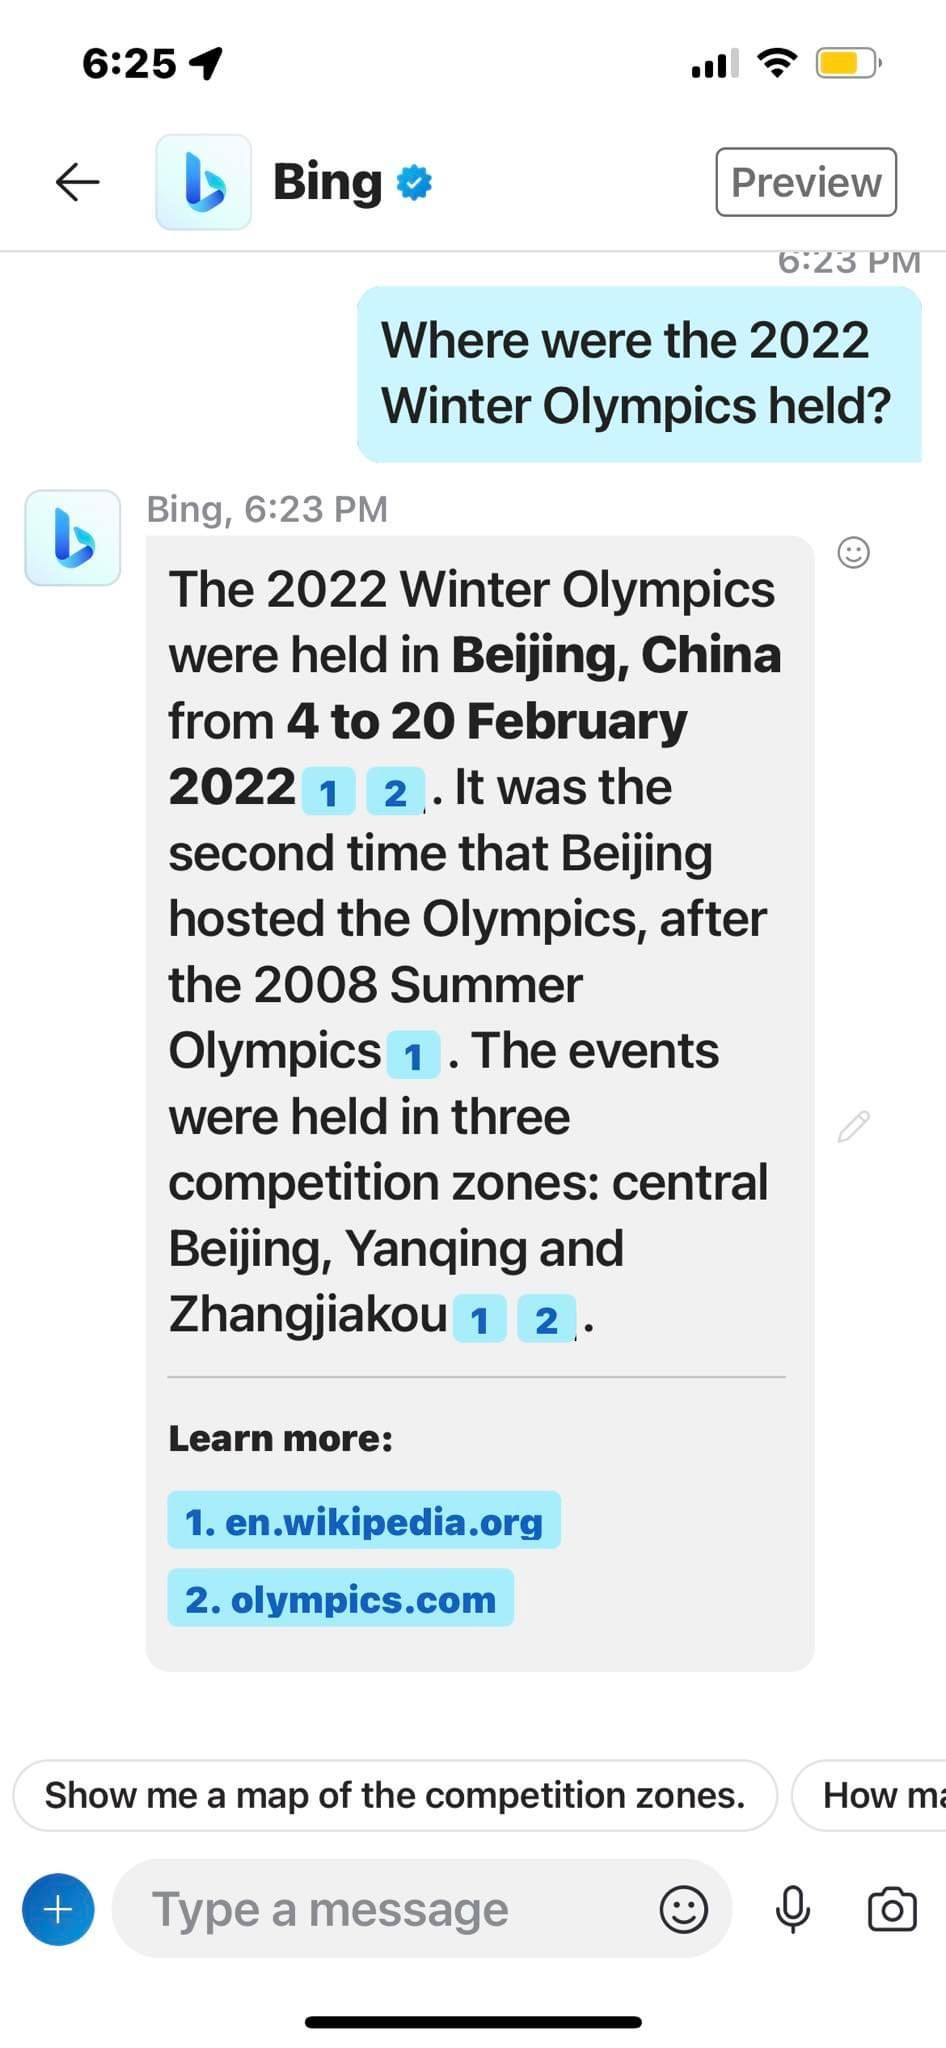 Bing Chat on Skype Answering Question About the Winter Olympics 